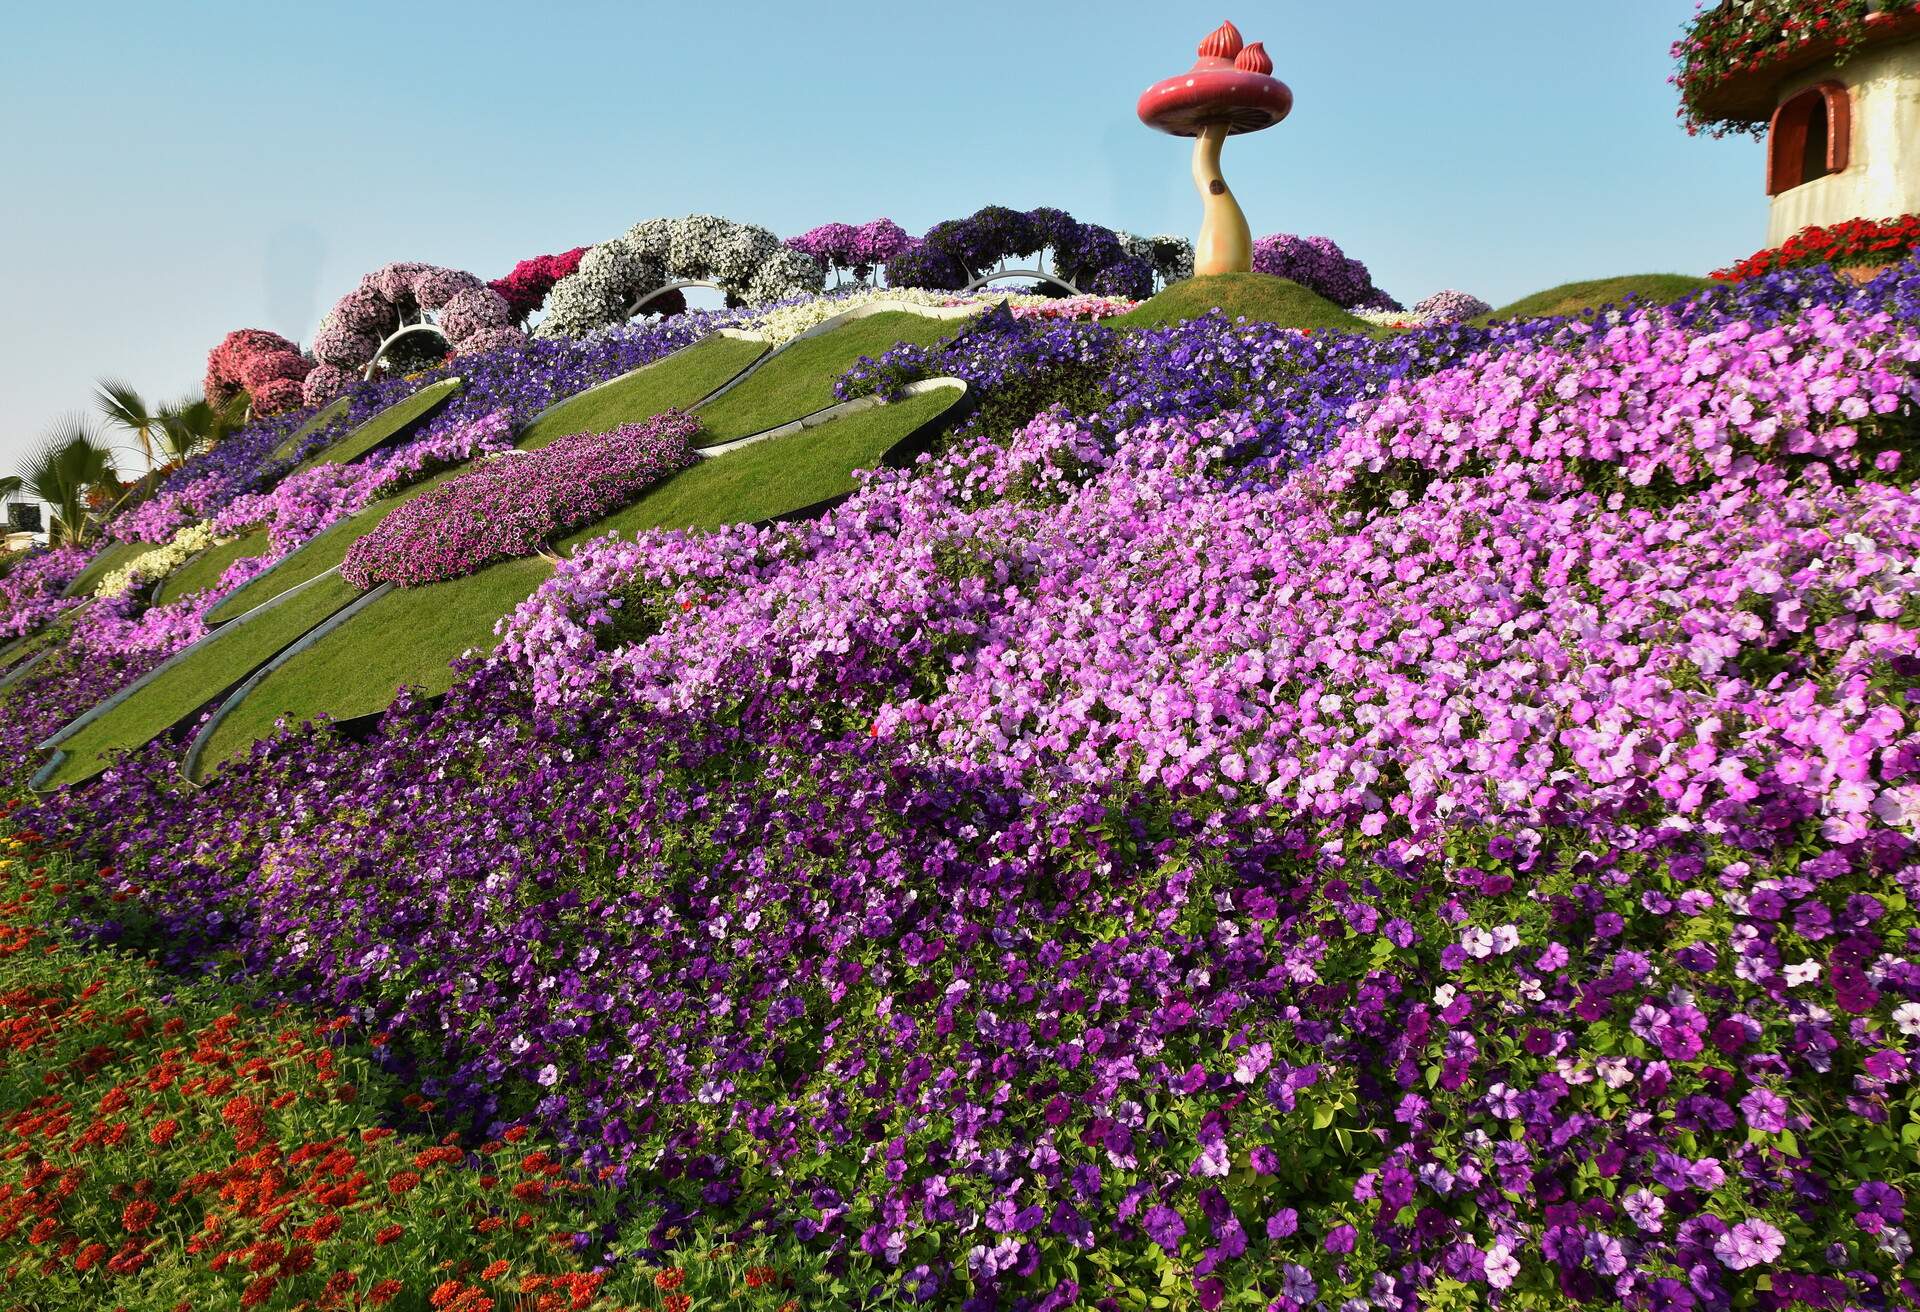 Bright flowers cover the slope in this portion of the Dubai Miracle Garden.